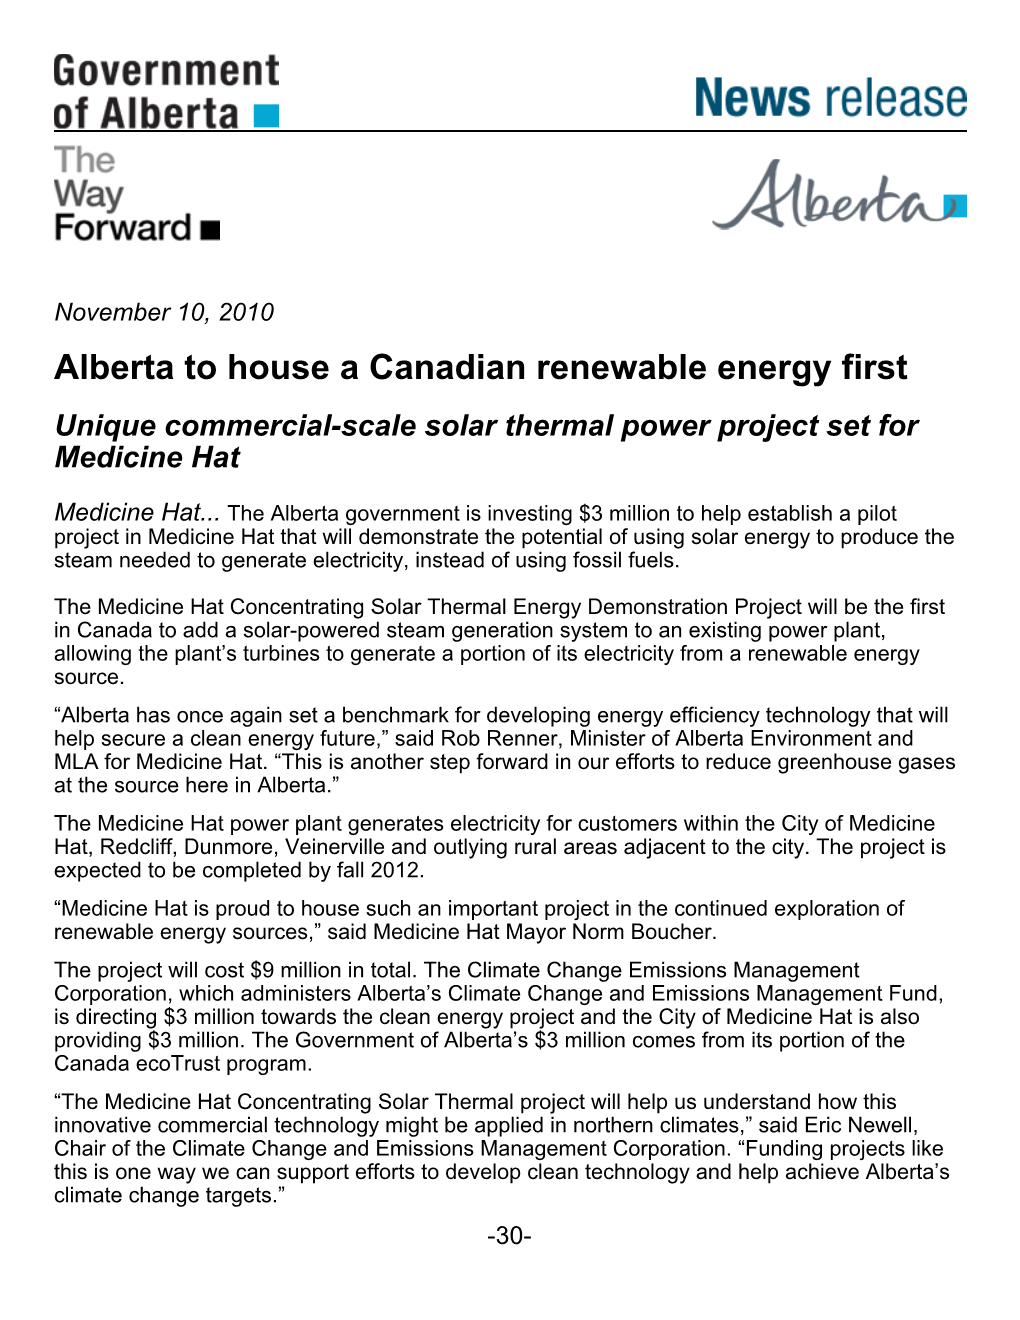 Alberta to House a Canadian Renewable Energy First Unique Commercial-Scale Solar Thermal Power Project Set for Medicine Hat